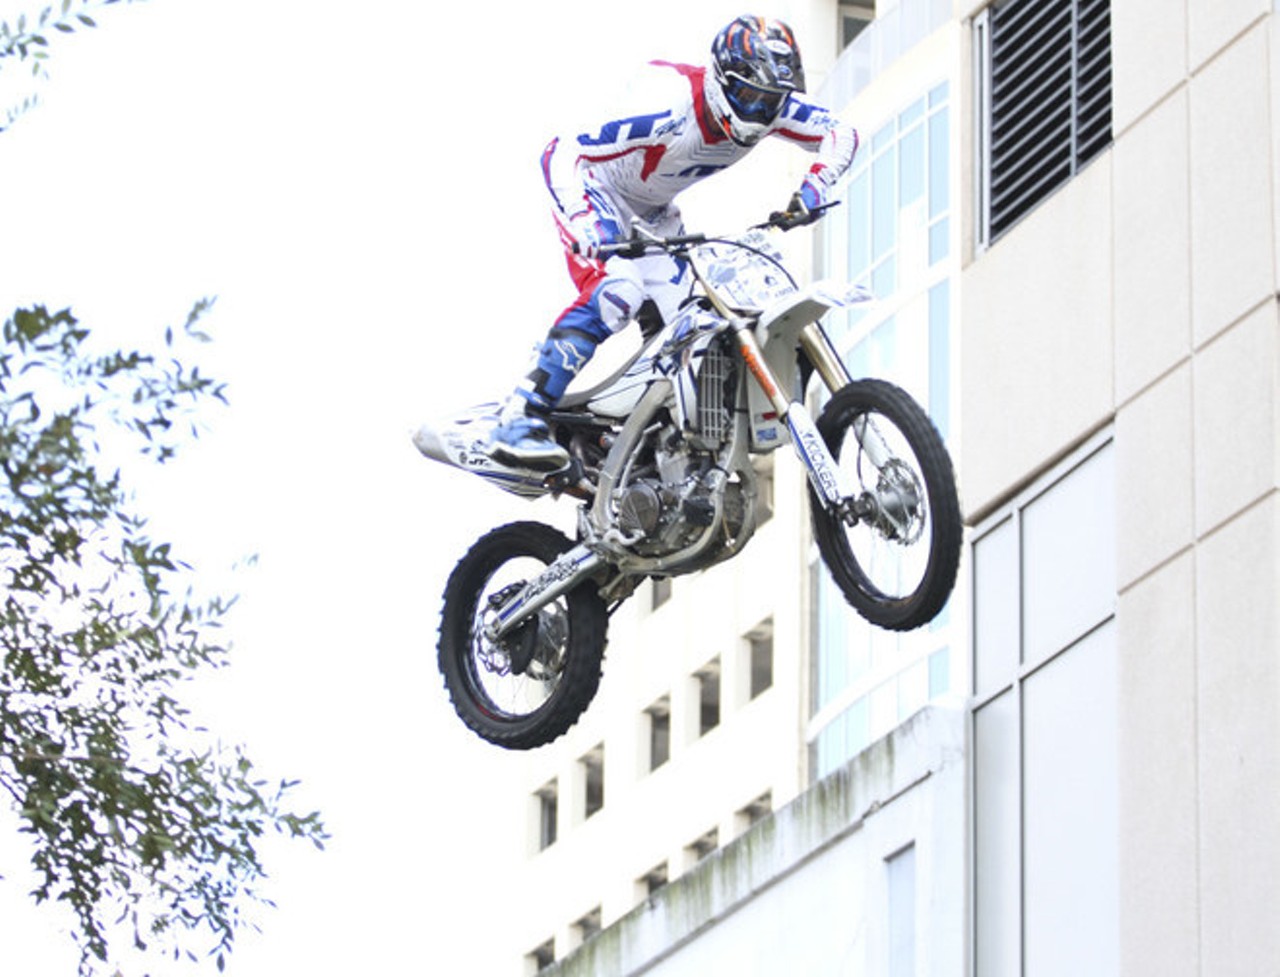 Motocross block party at Wall Street Plaza. See tons more pics here!